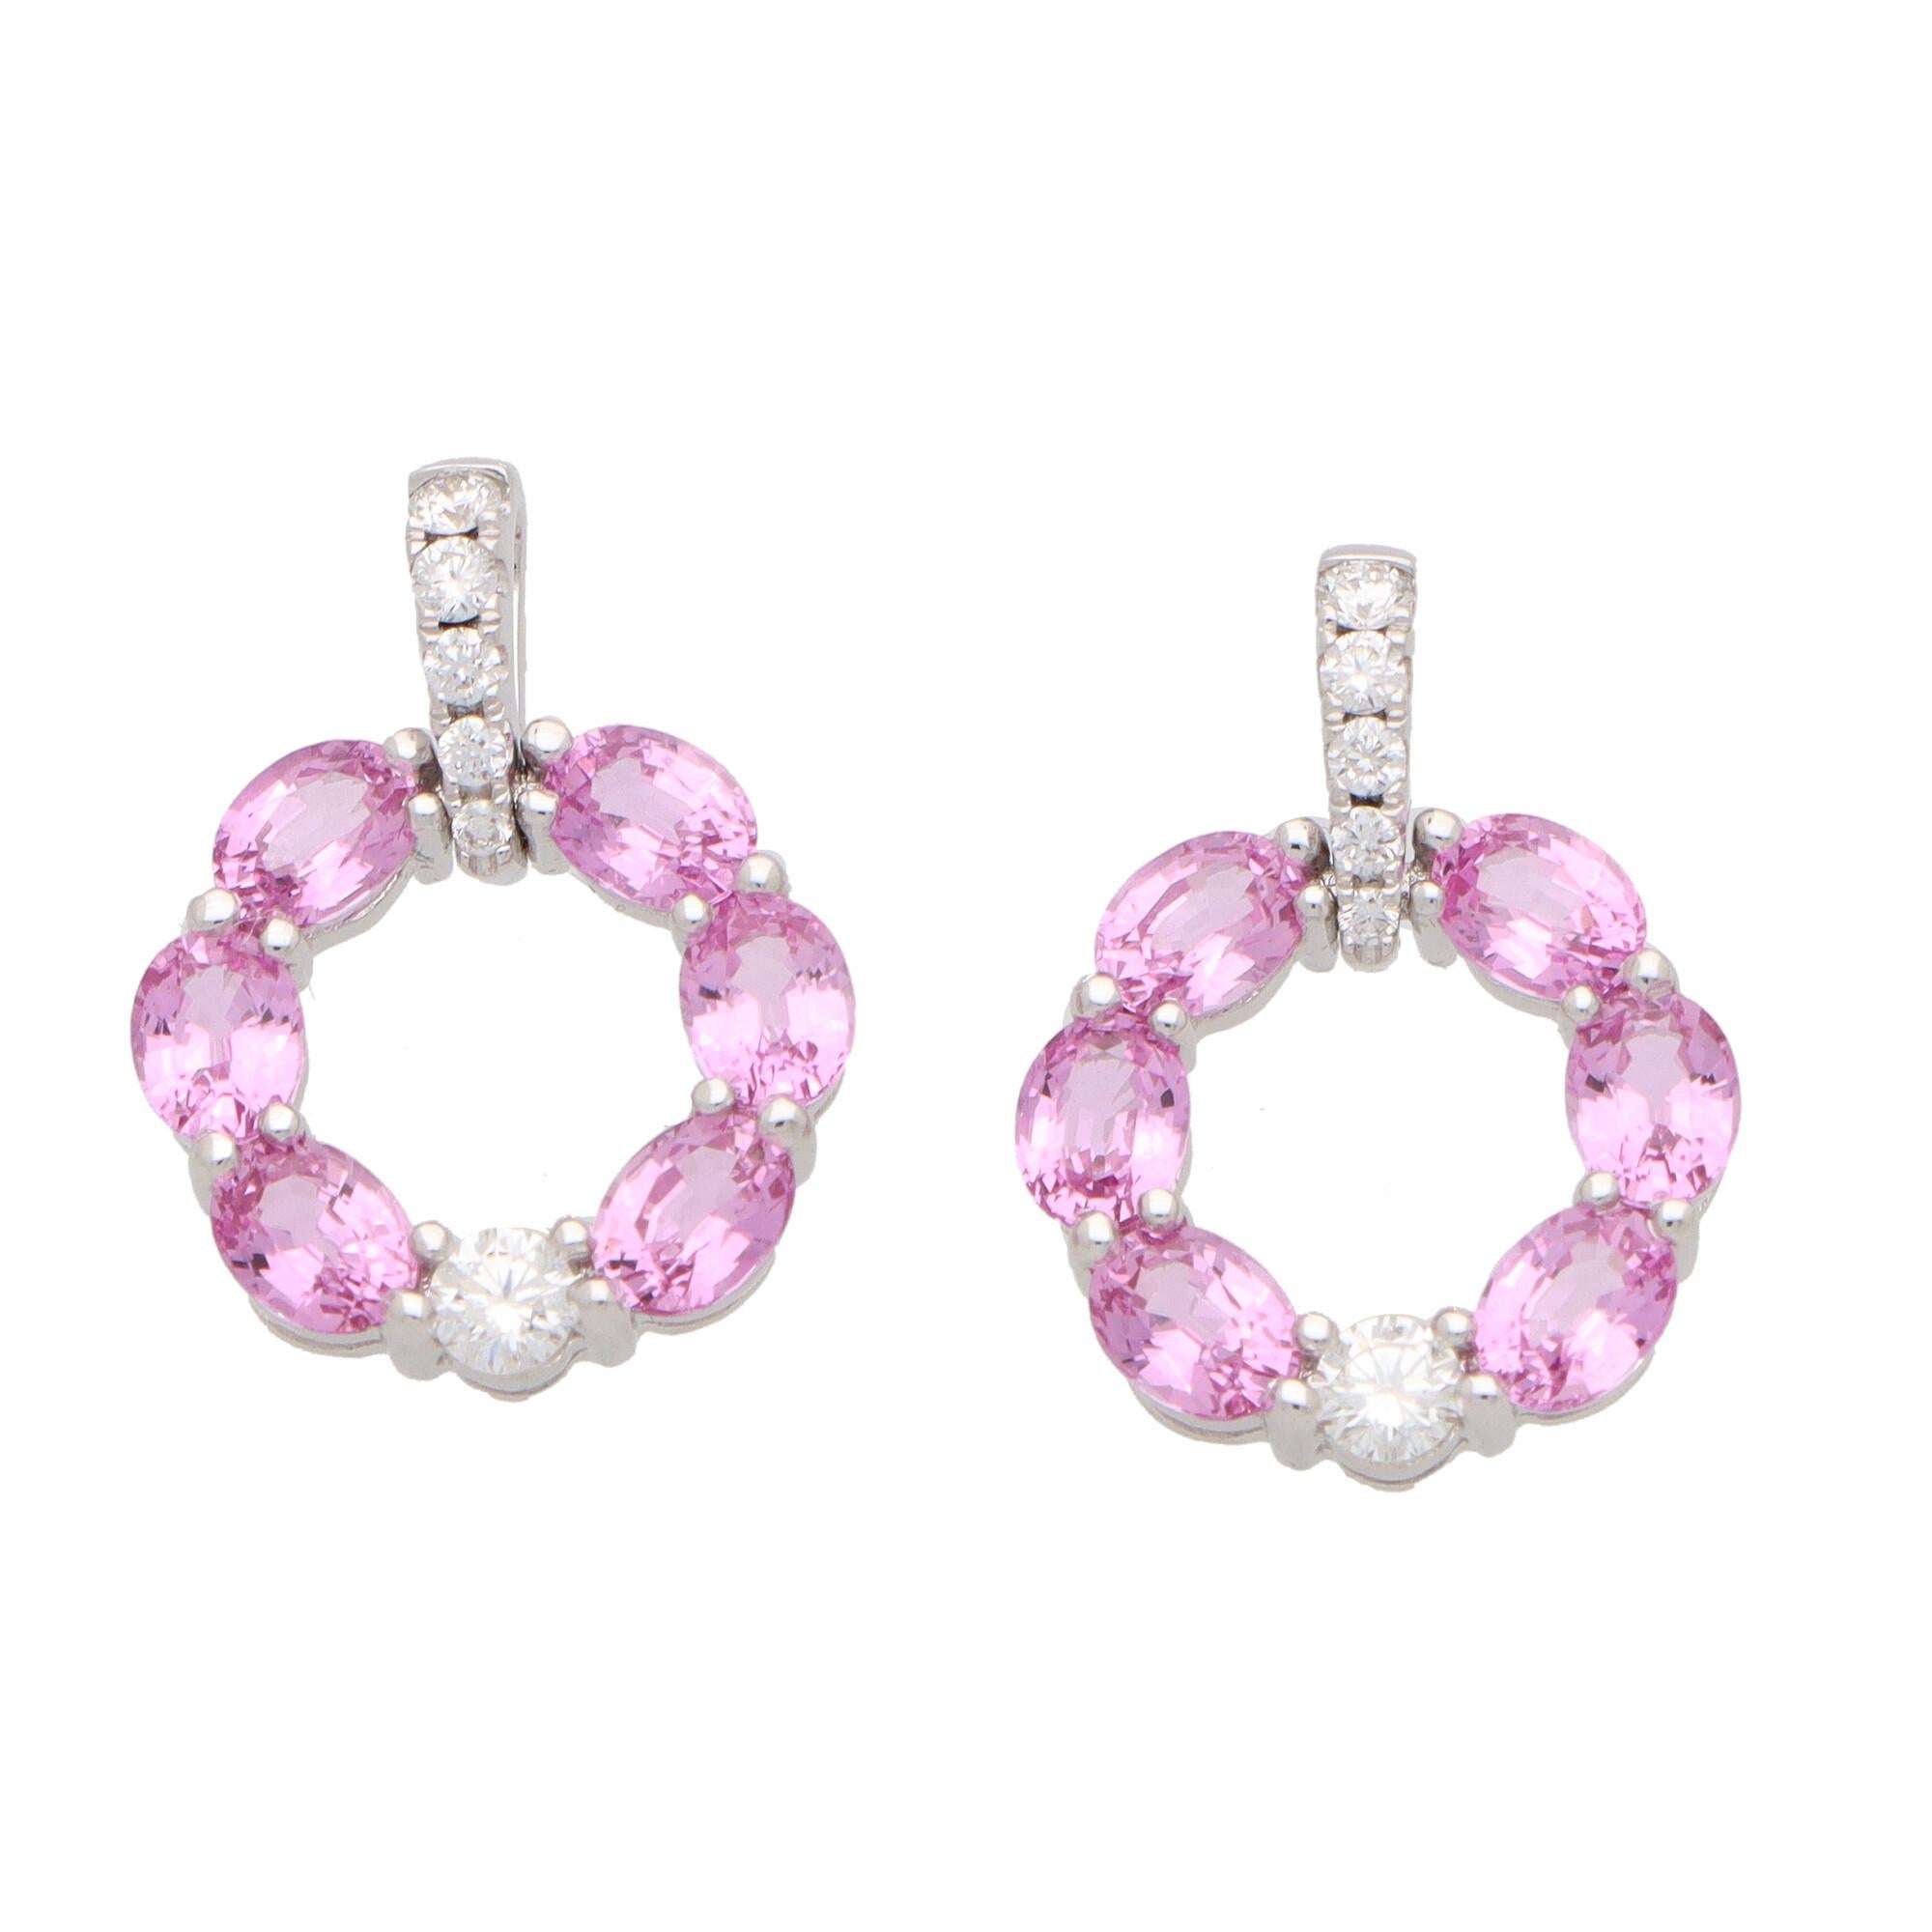 Contemporary Patel Pink Sapphire and Diamond Earrings in 18k White Gold In Good Condition For Sale In London, GB